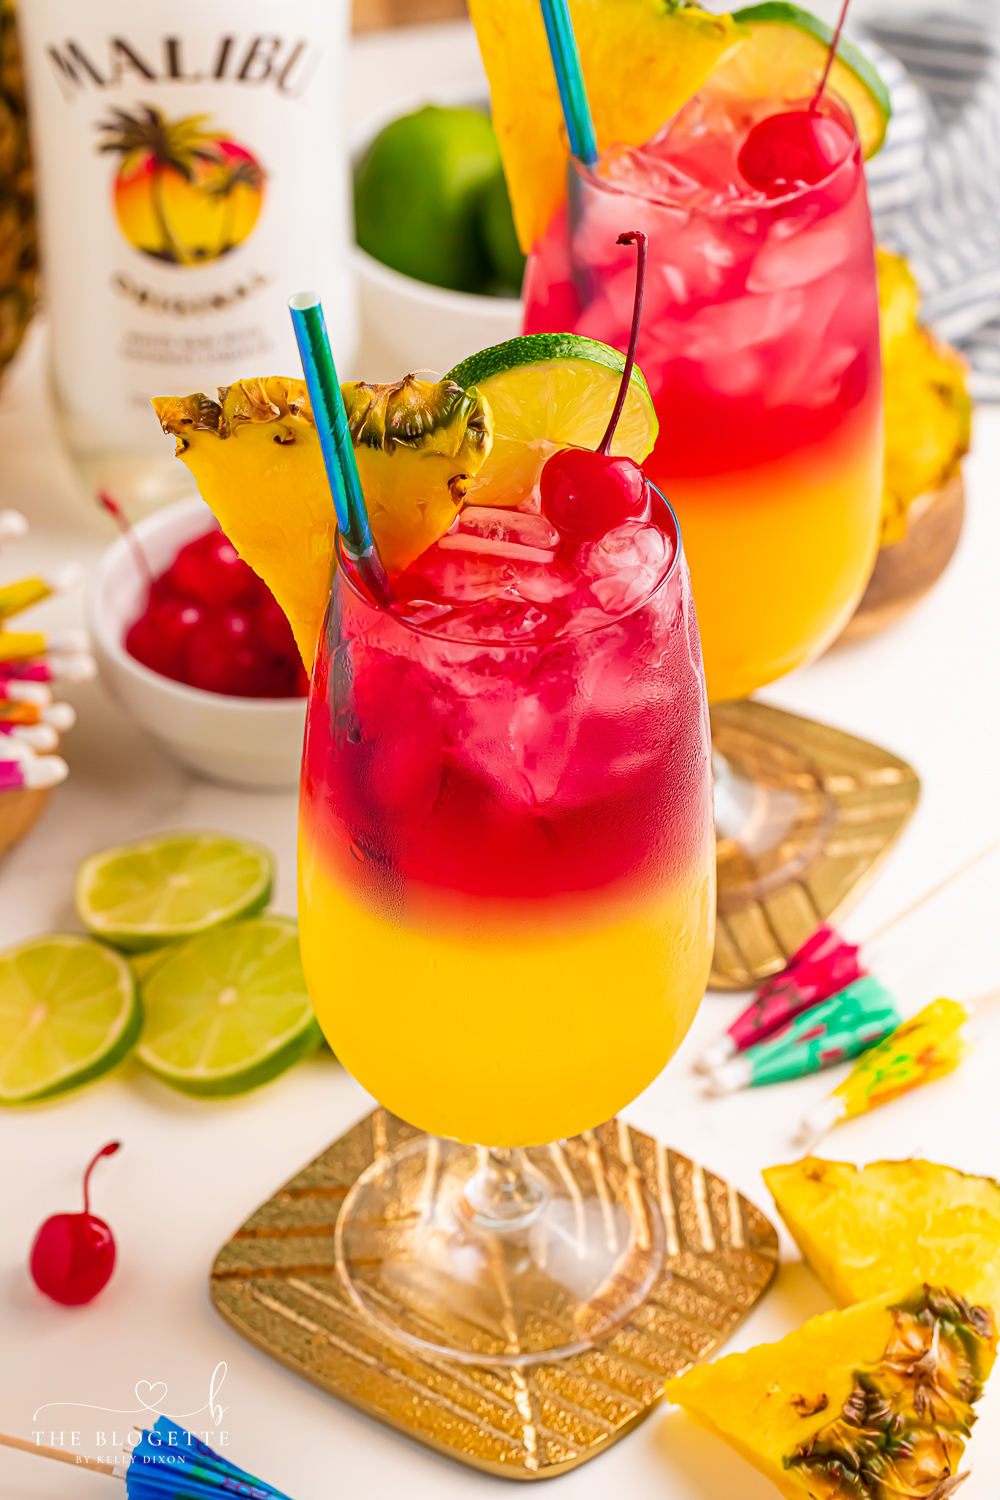 Make a beautiful Malibu Bay Breeze cocktail by layering pineapple juice, Malibu rum, and cranberry juice! Perfect all spring and summer long!